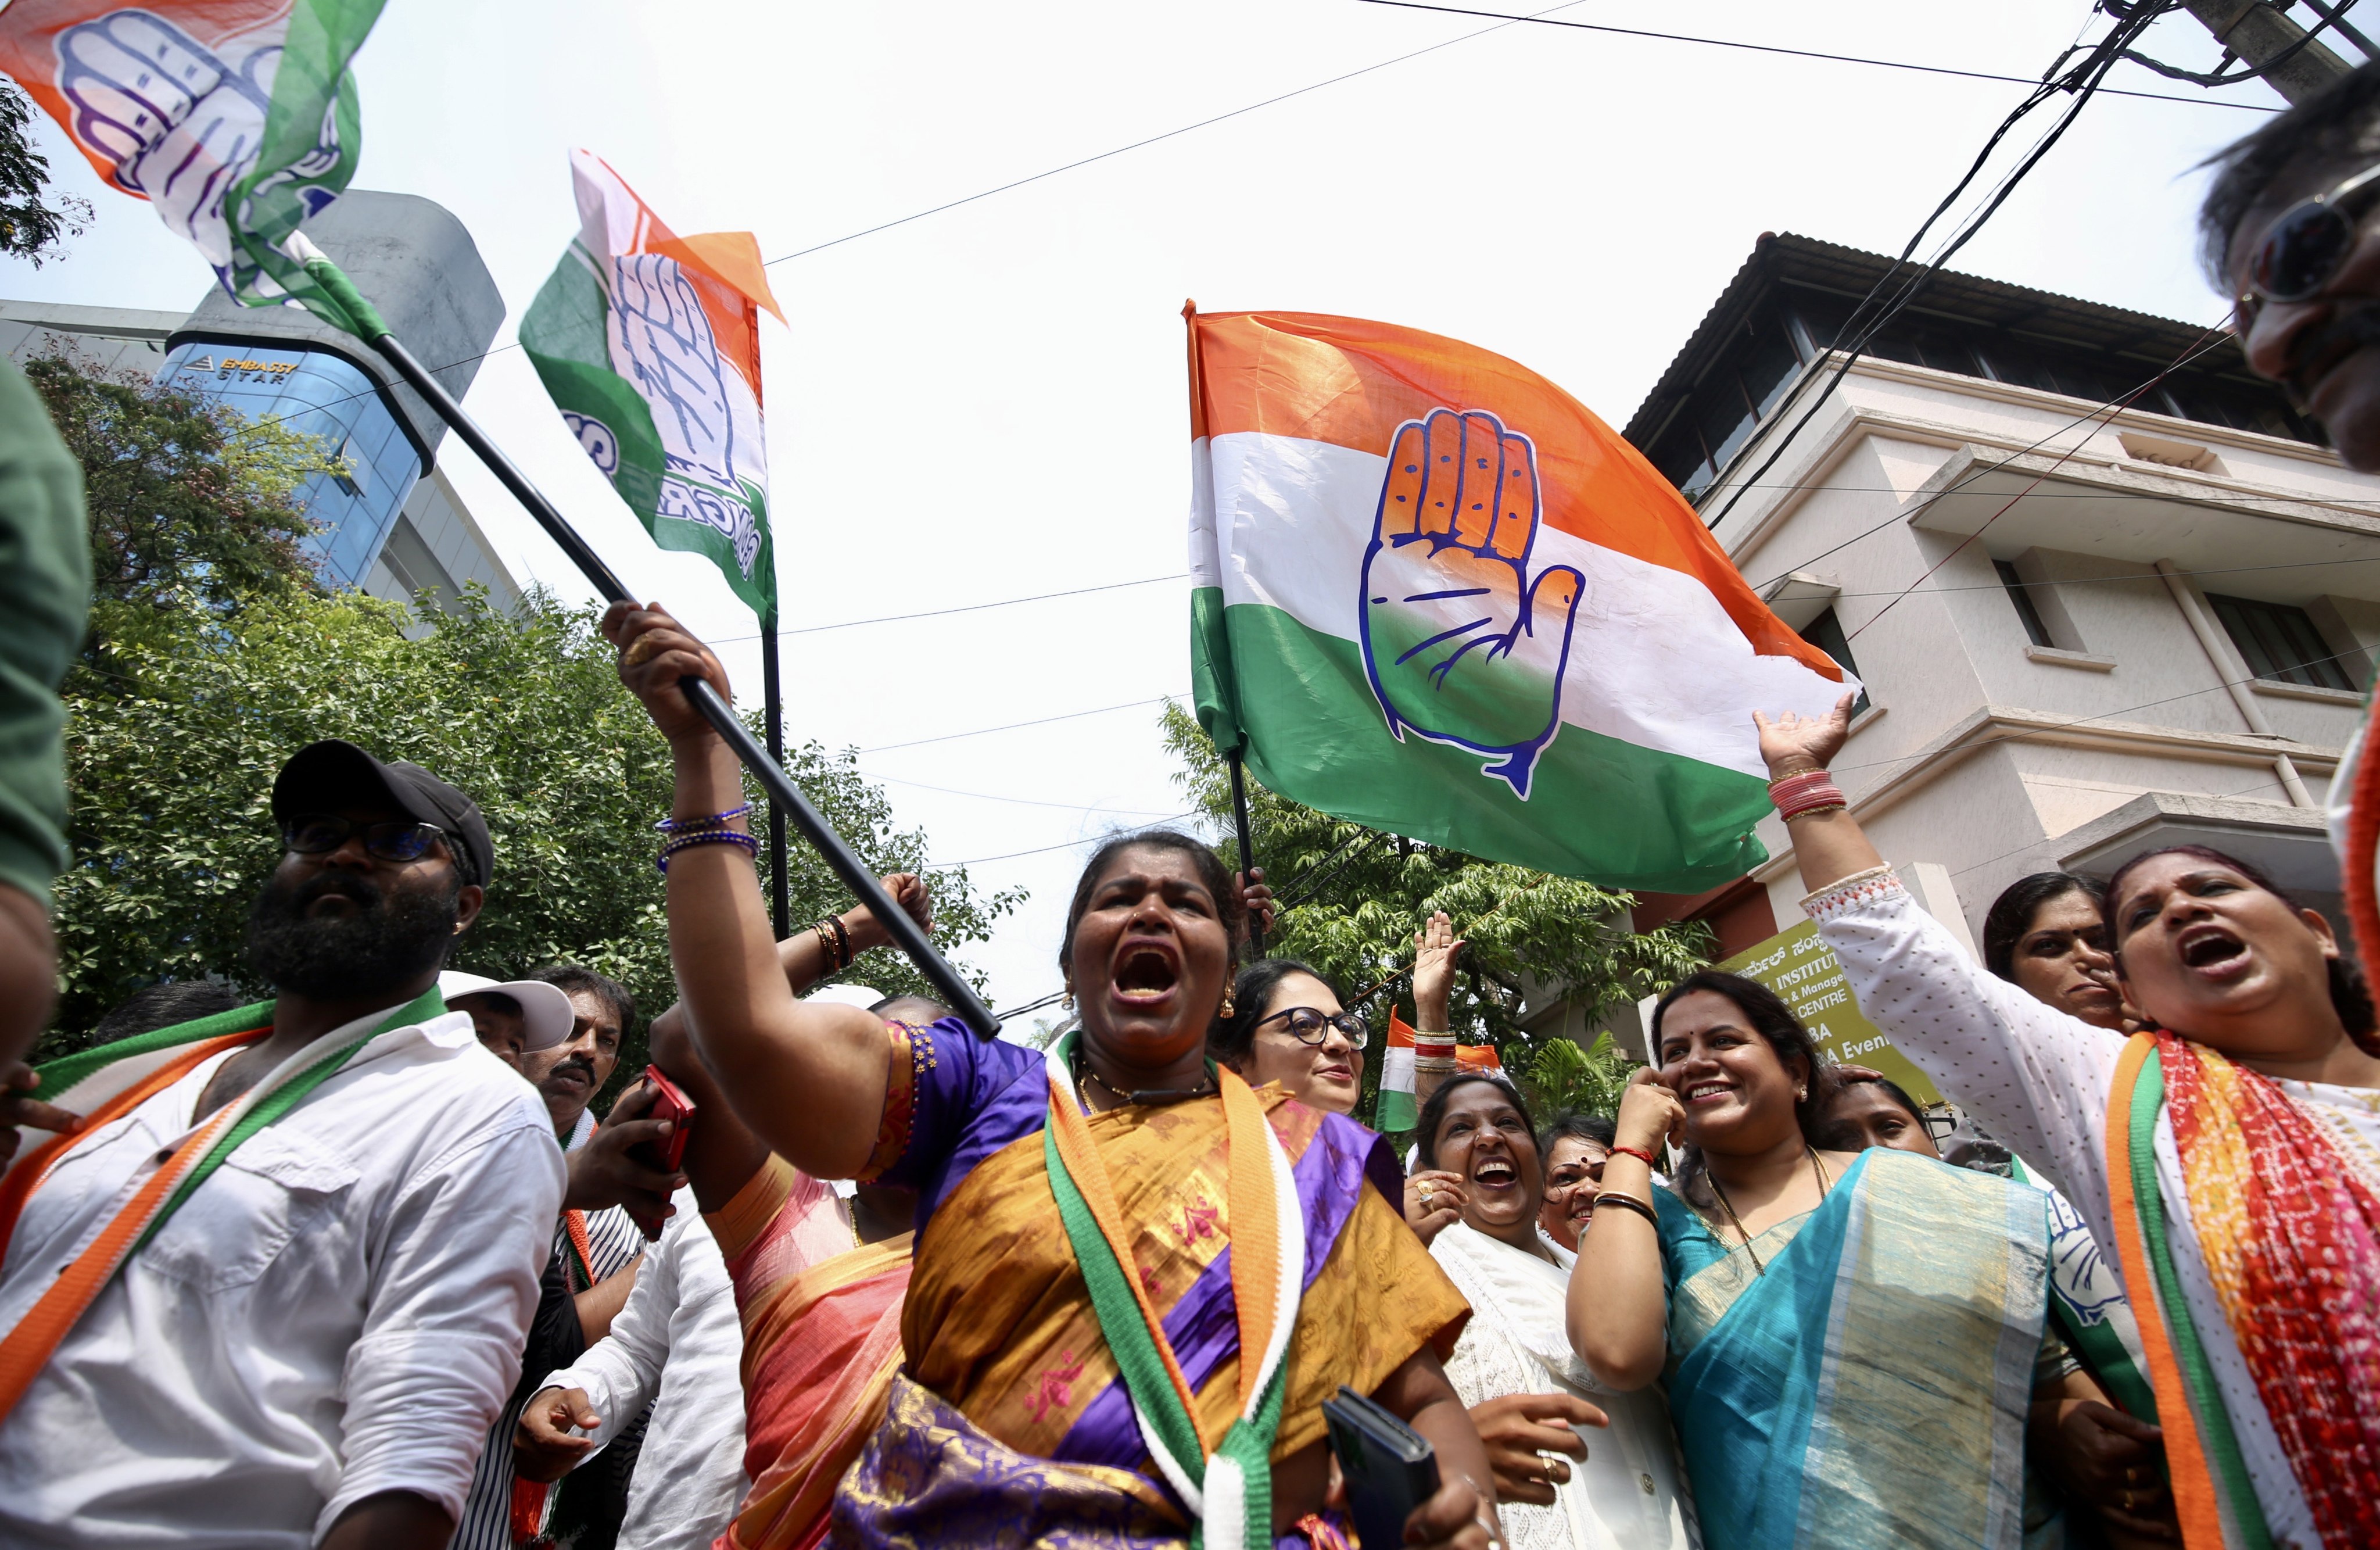 Supporters of India’s Congress party celebrate its victory in the Karnataka state assembly election in the southern city of Bangalore on Saturday. Photo: EPA-EFE